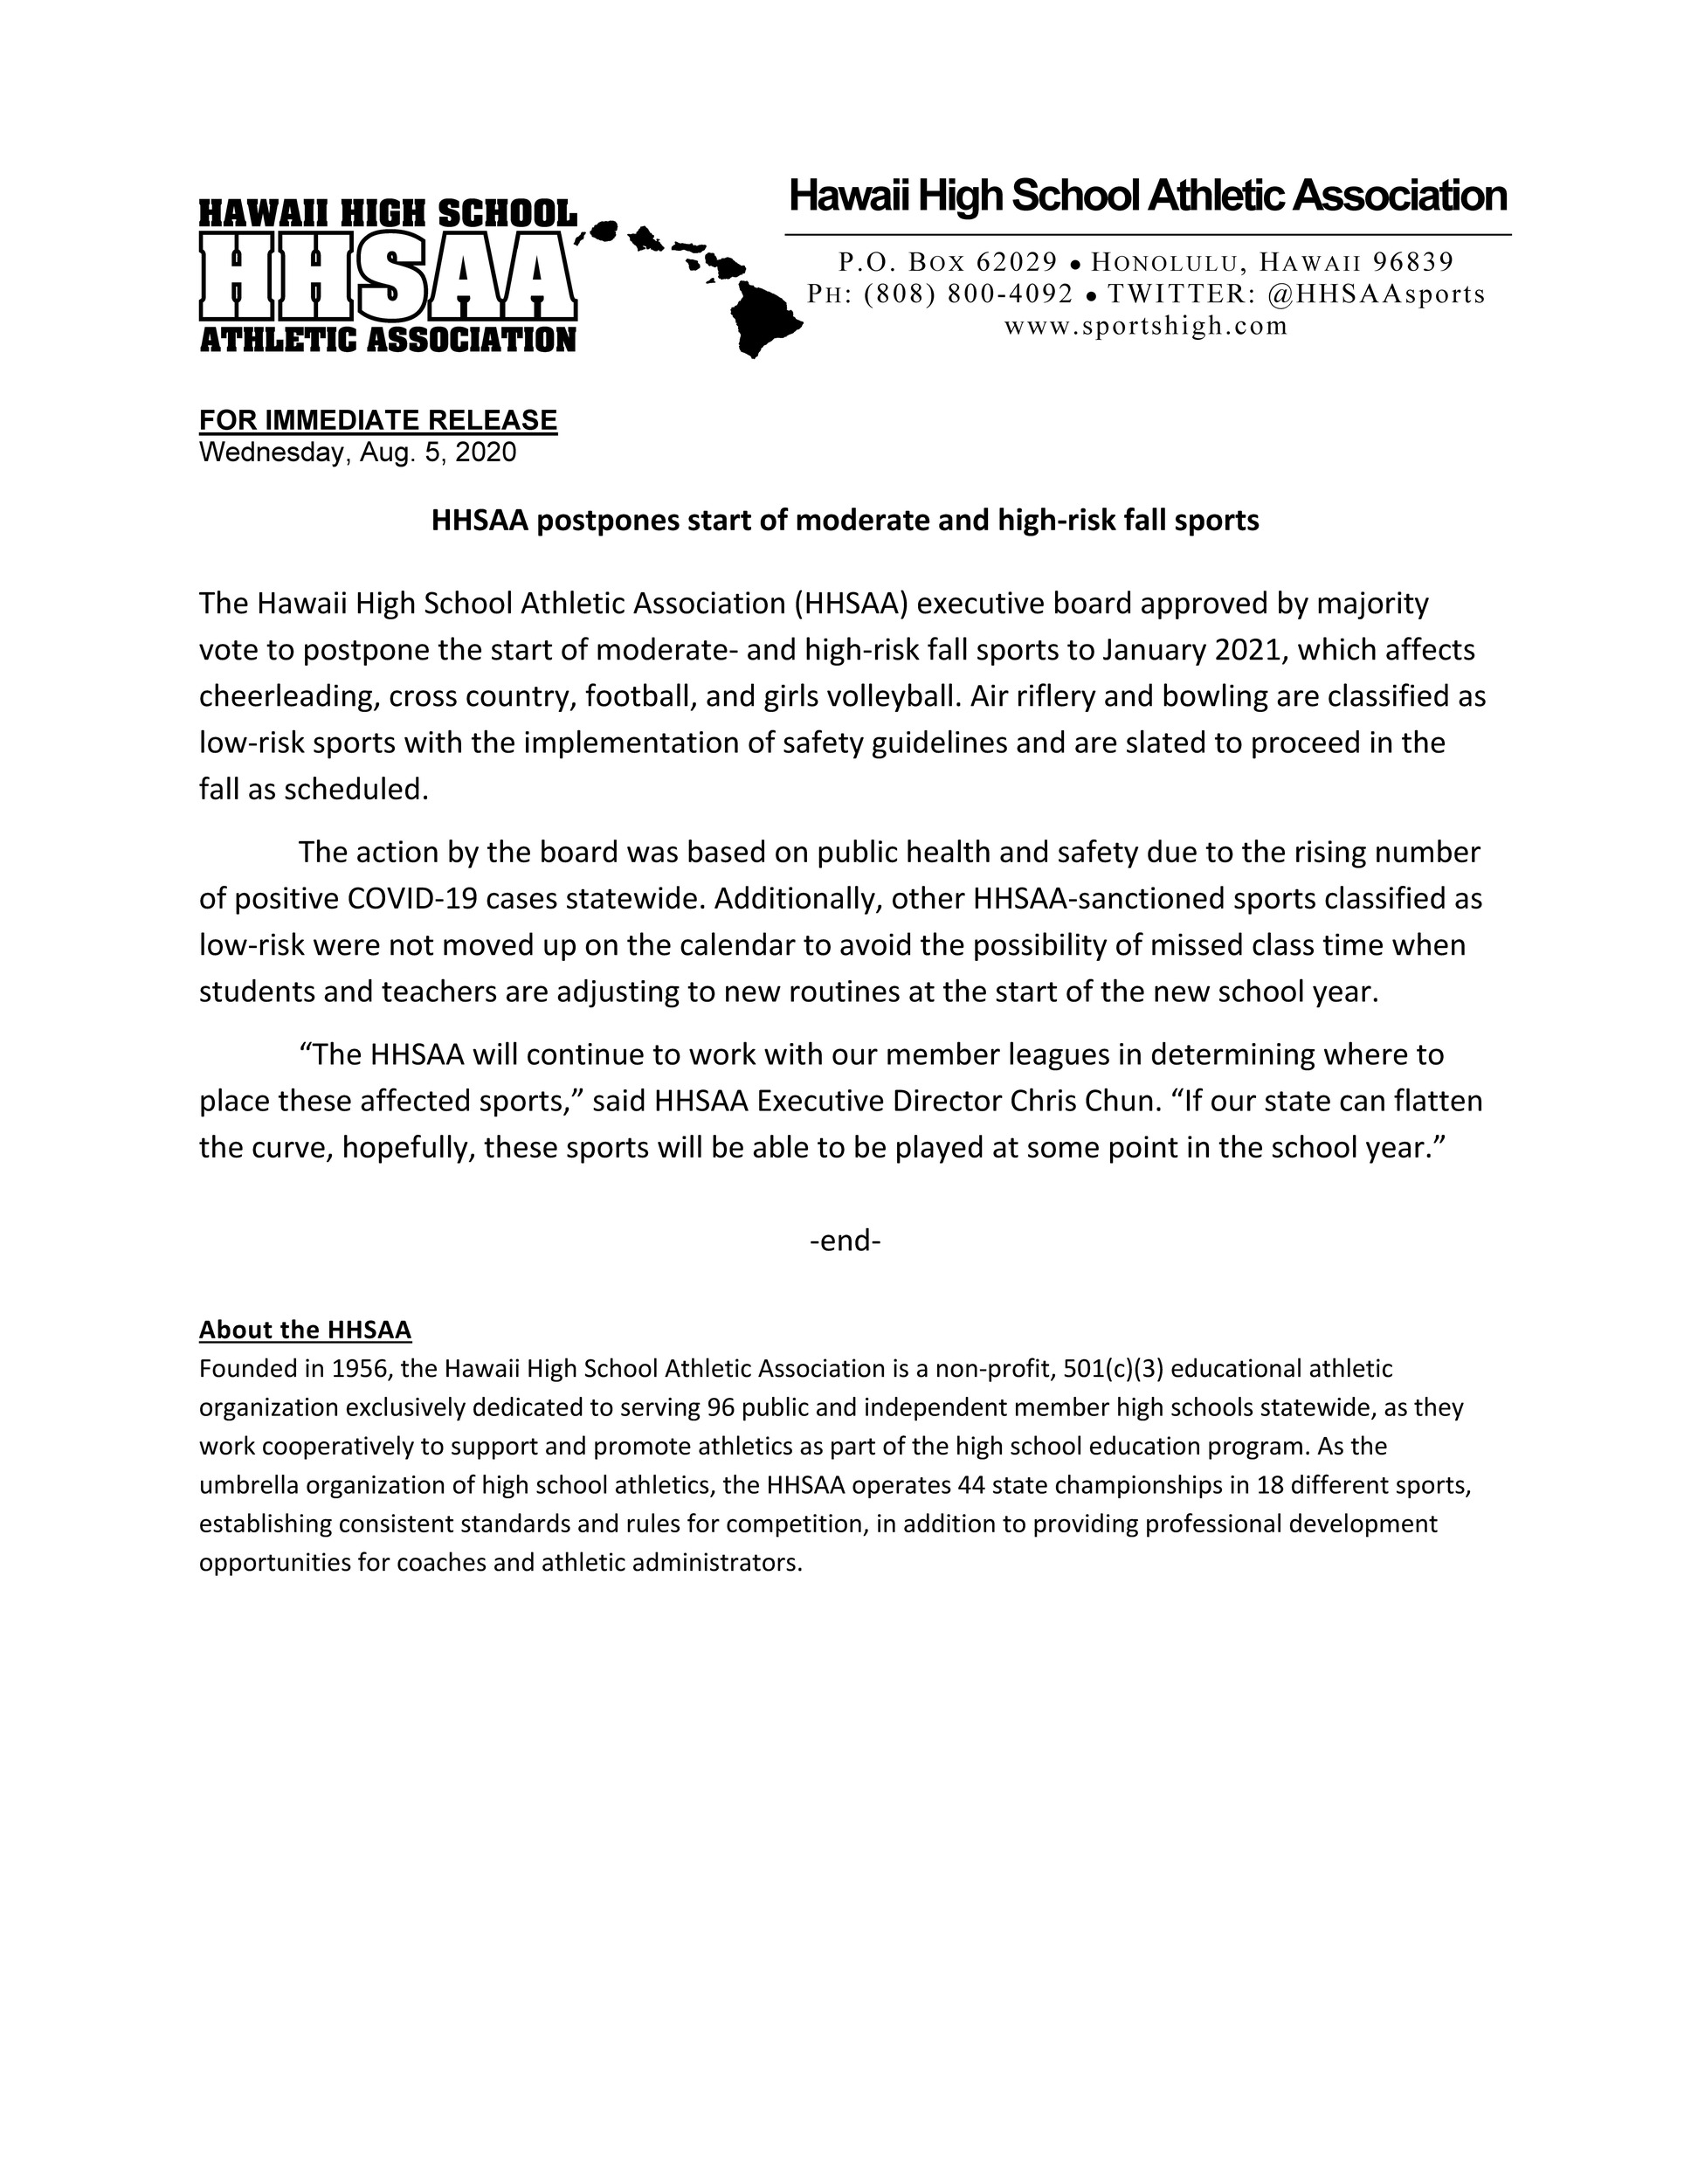 2020-08-04-press-release-hhsaa-fall-sports